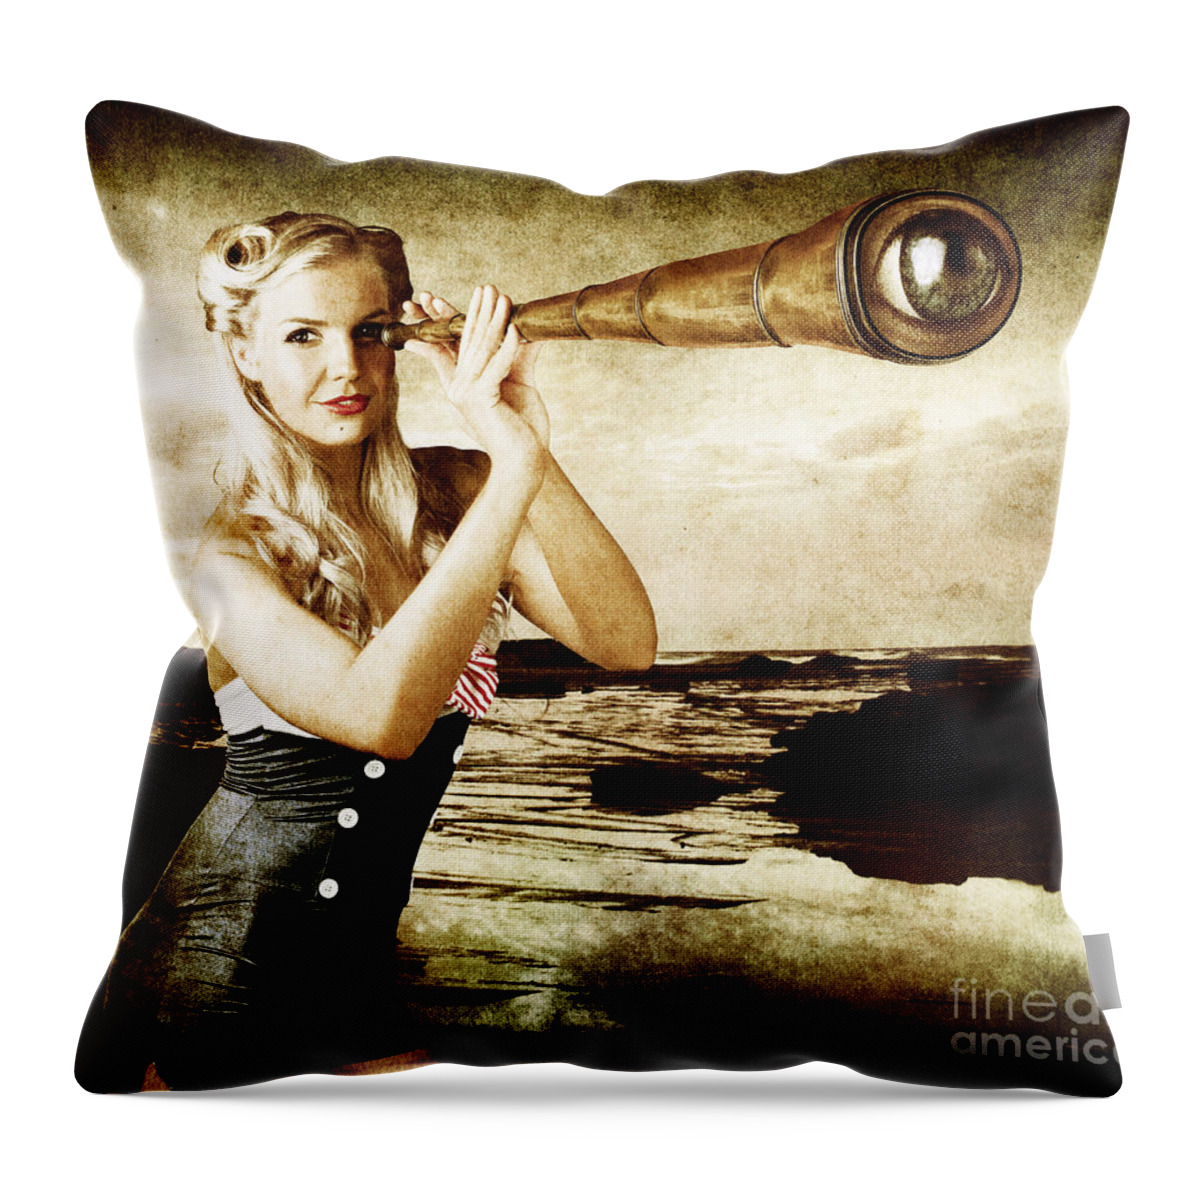 Steampunk Throw Pillow featuring the digital art Beautiful Vintage Woman With Steampunk Telescope by Jorgo Photography